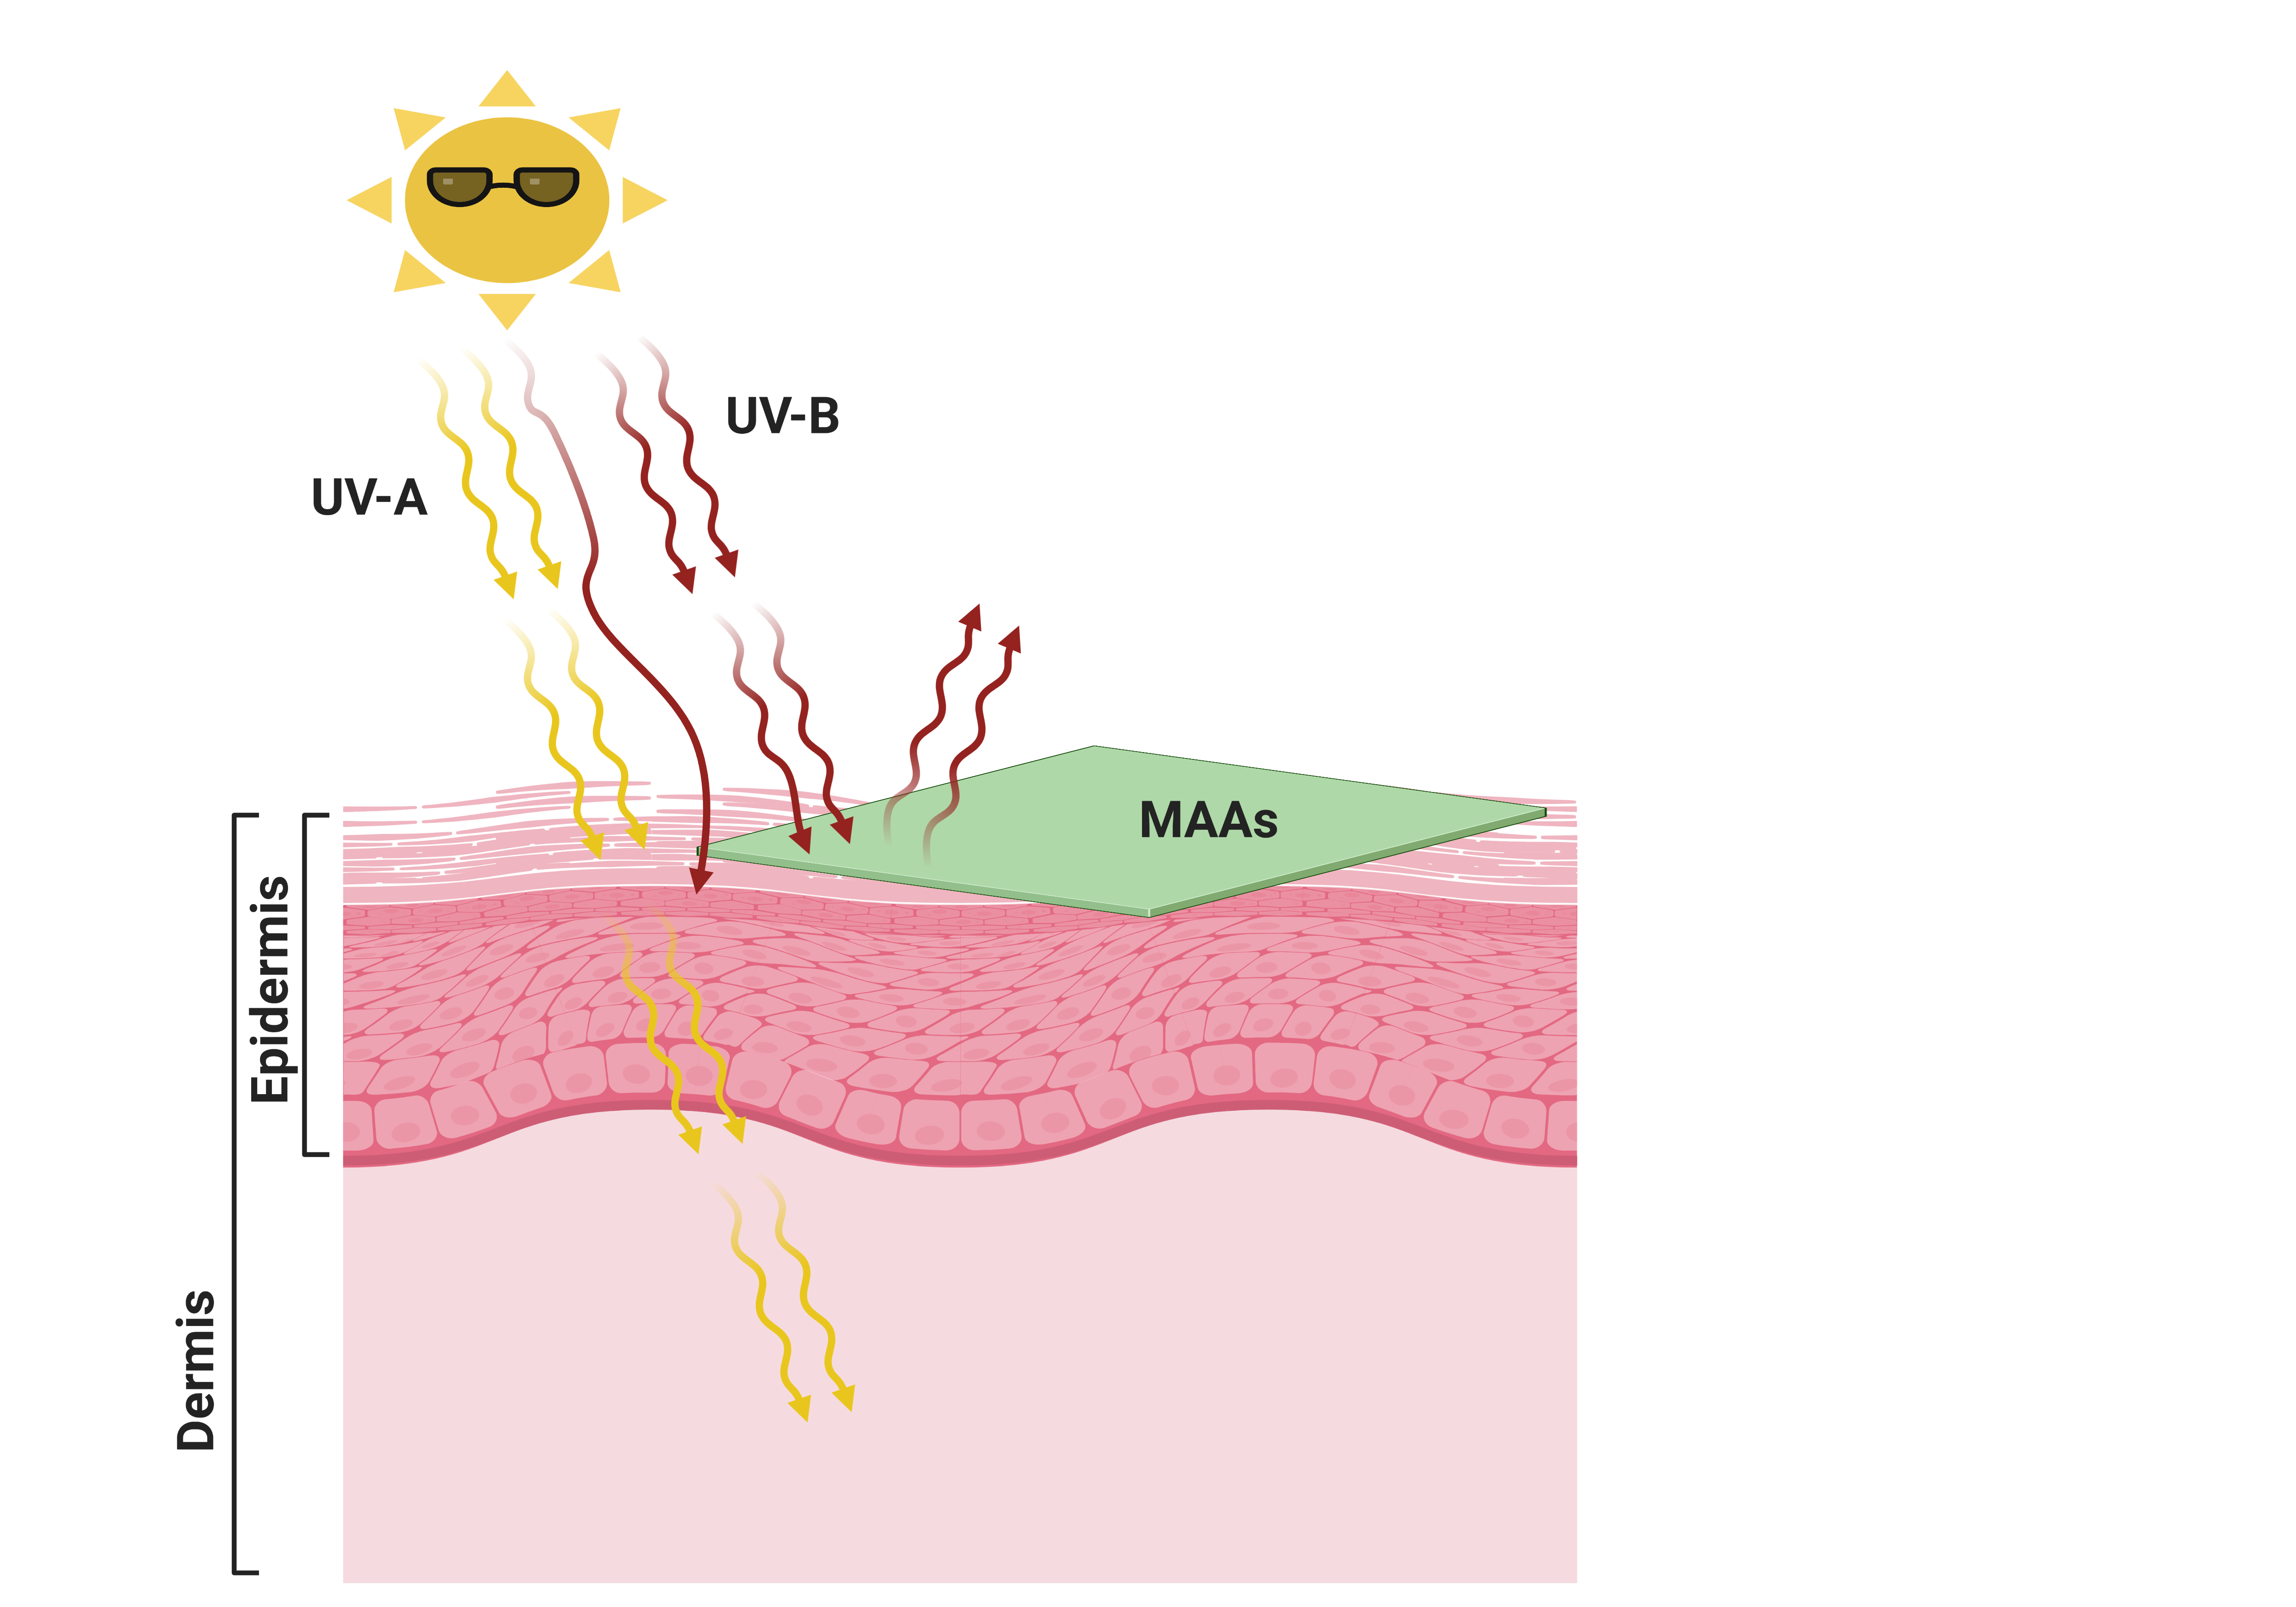 Figure 5. Use of natural eco-friendly mycosporine-like amino acids (MAAs) as a green sunscreen to protect skin against UV-induced skin damage. Created with BioRender (https://biorender.com/ accessed on 15 April 2021).